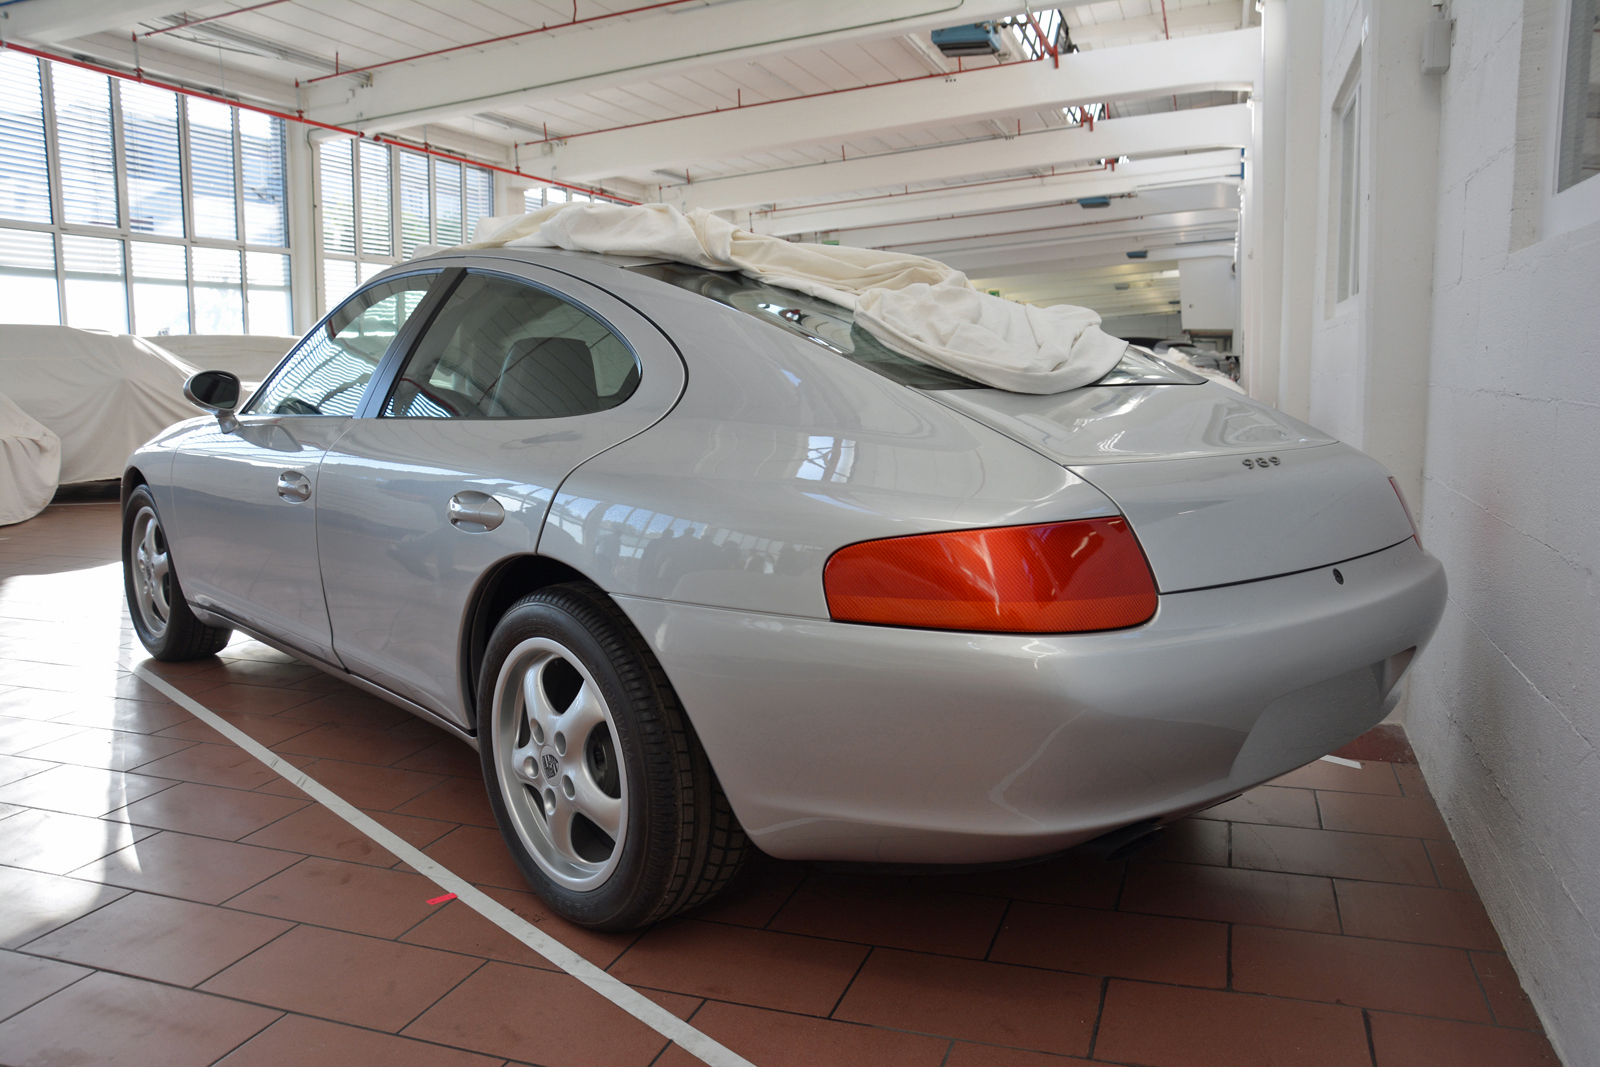 <p>The 989 came close to production; a 1995 launch date was even locked in. Porsche executives canceled the project in 1991 after realizing the 989 would be <strong>far too expensive</strong> to design and build. The 996-series 911 borrowed a few styling cues from the 989, but the idea of a Porsche sedan for four was dropped for over a decade.</p>